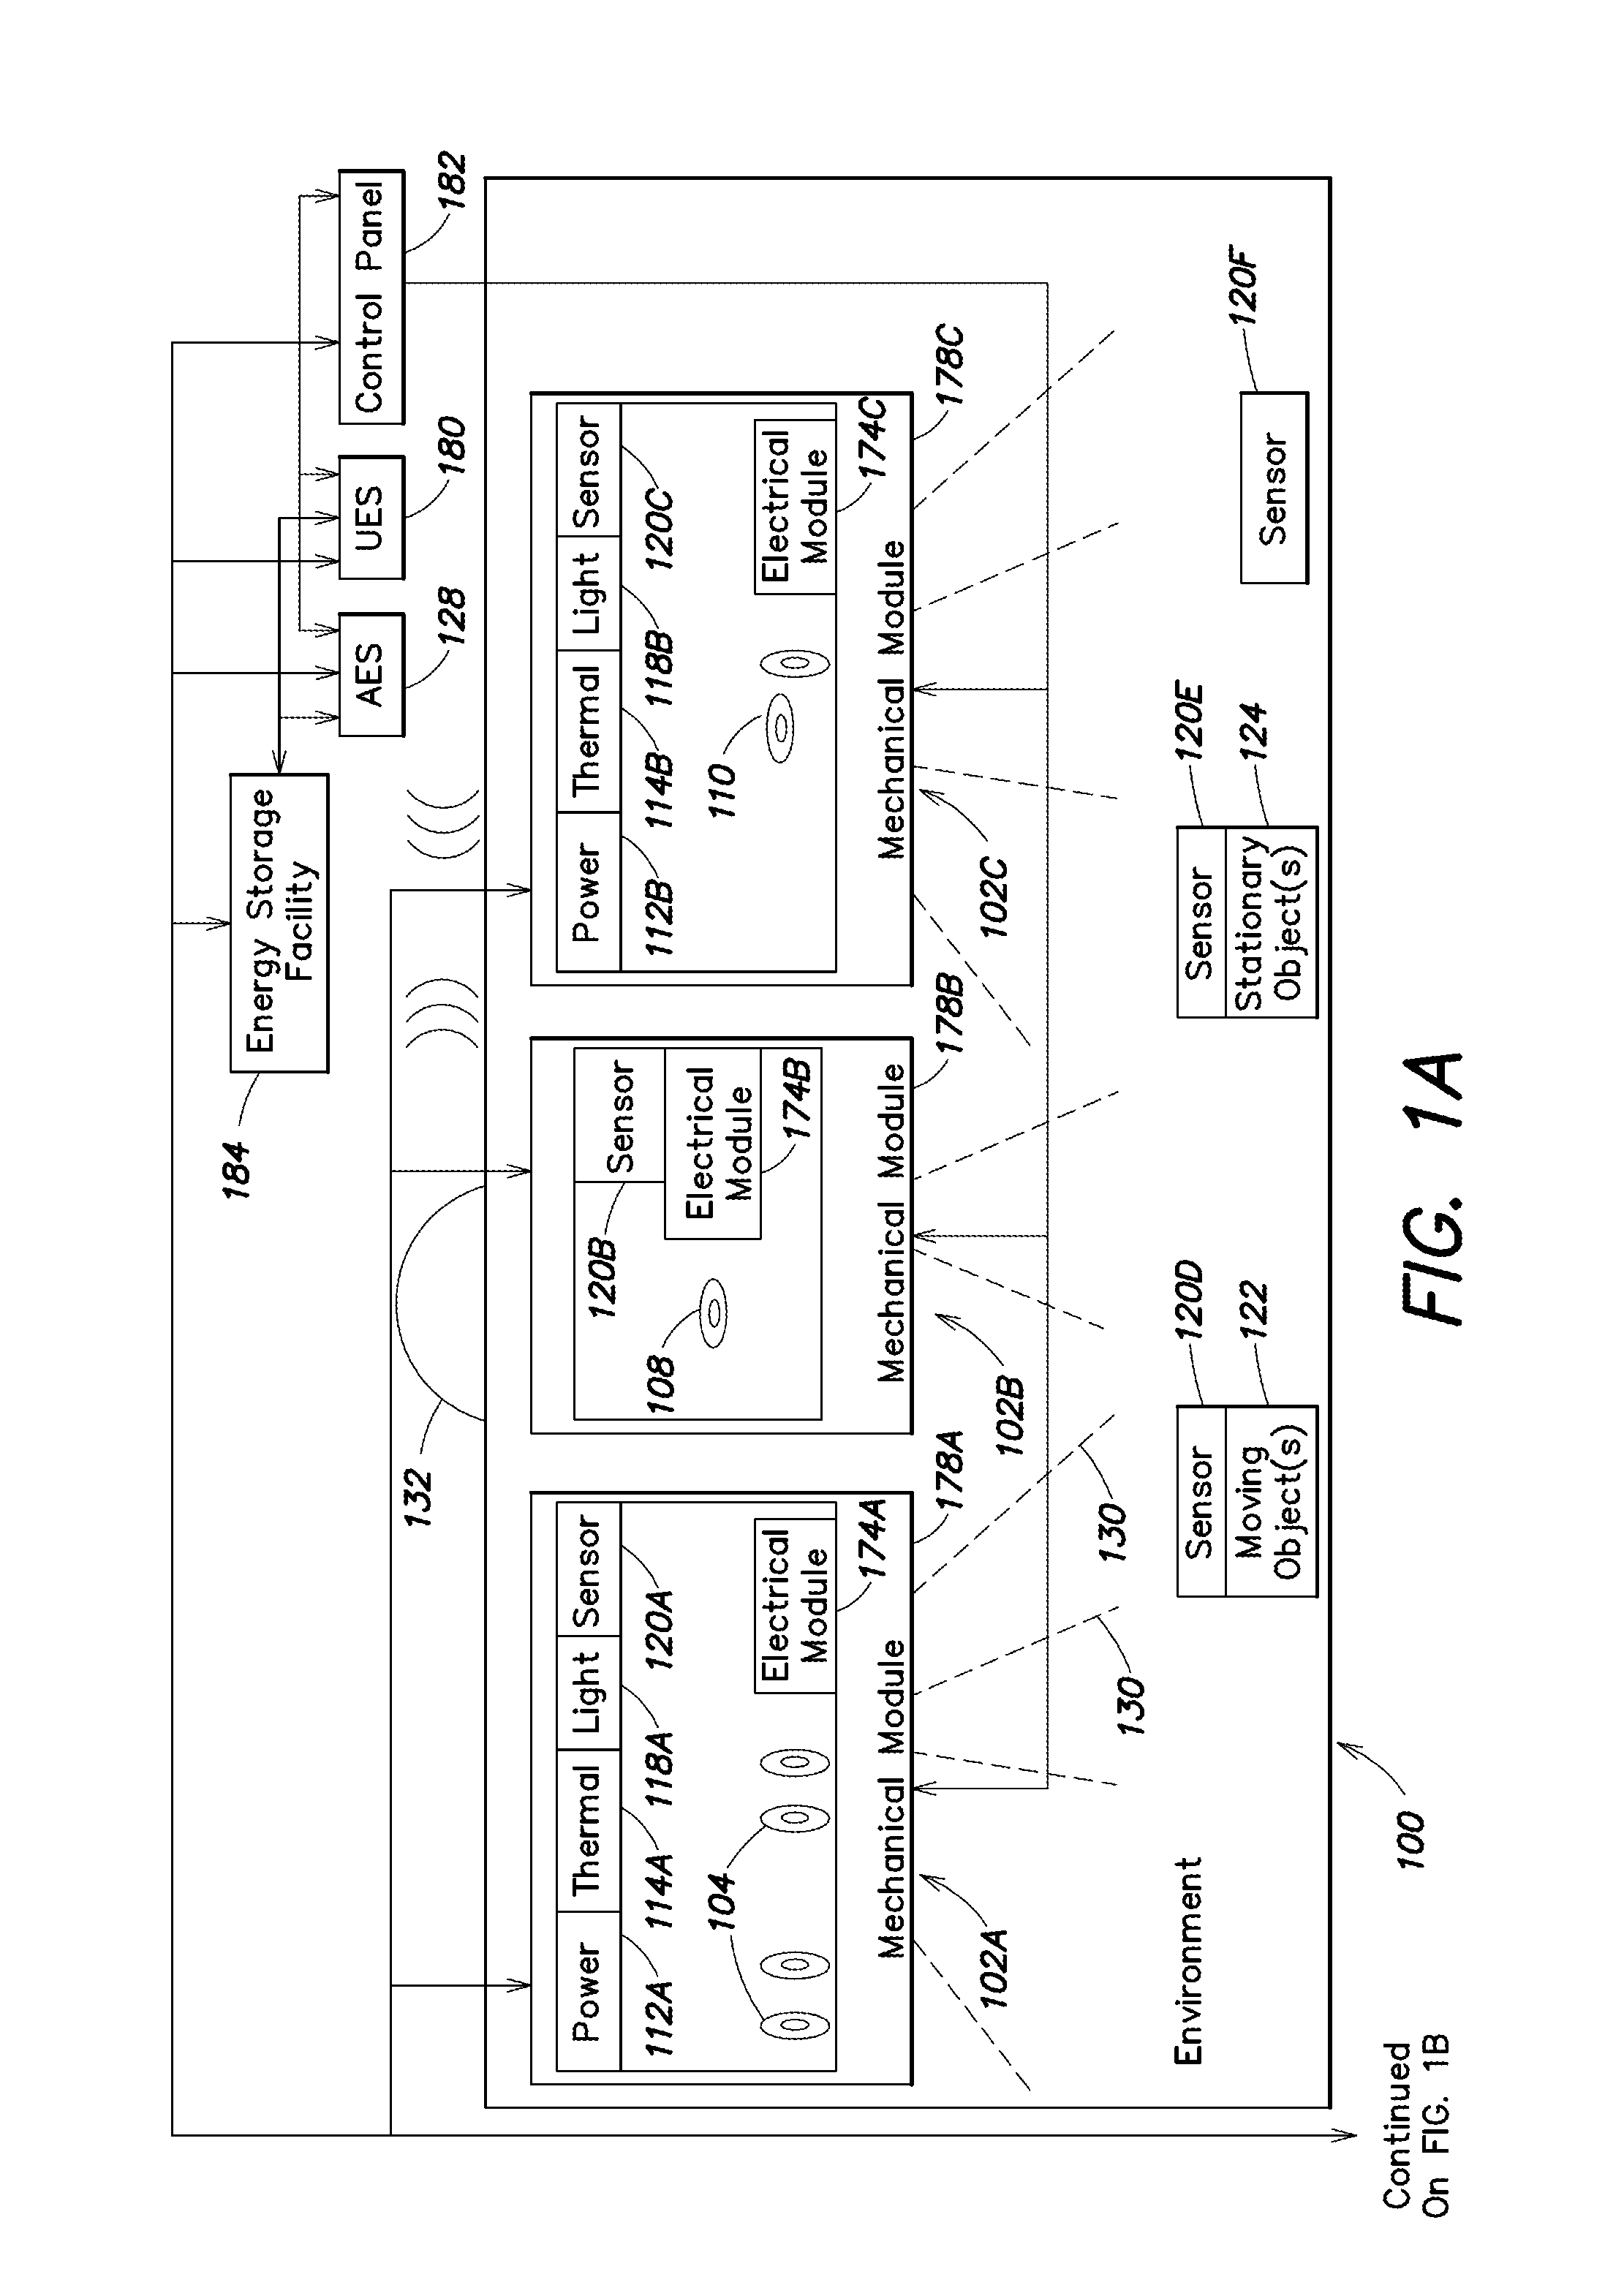 Methods, apparatus, and systems for prediction of lighting module performance